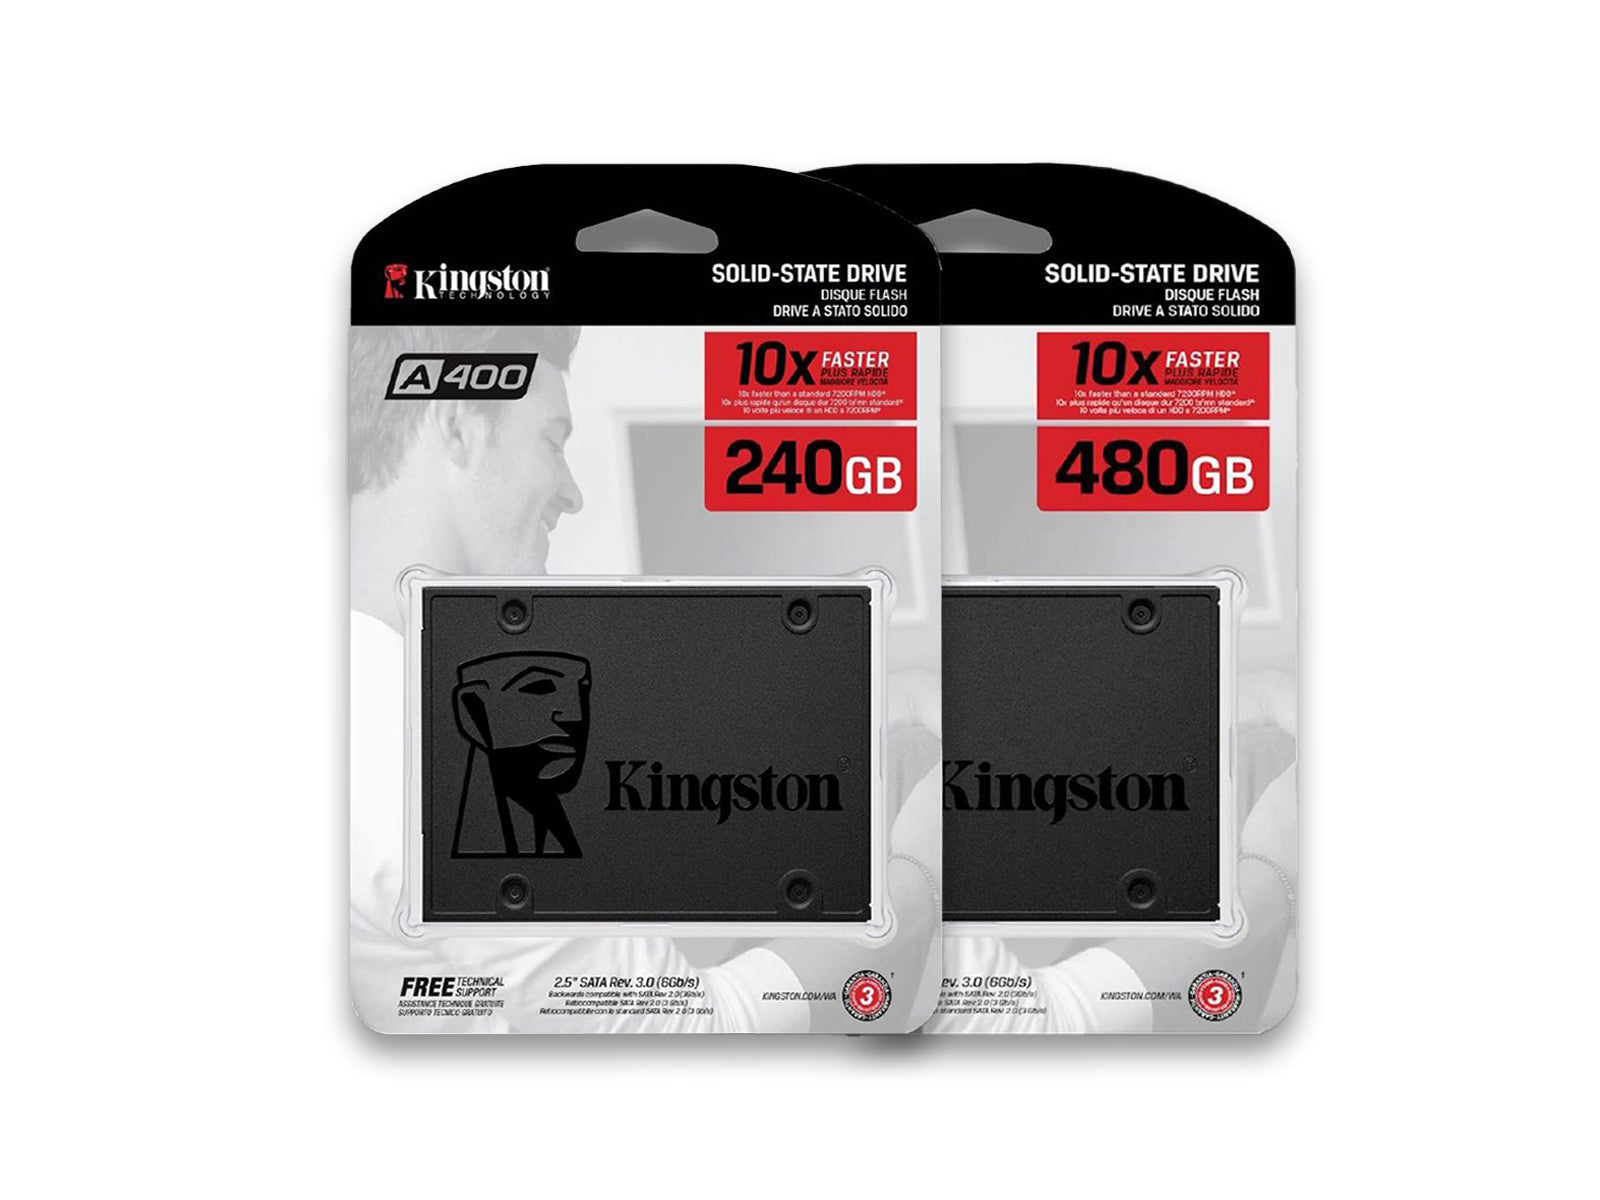 Kingston-A400 SSD In 240GB And 480GB